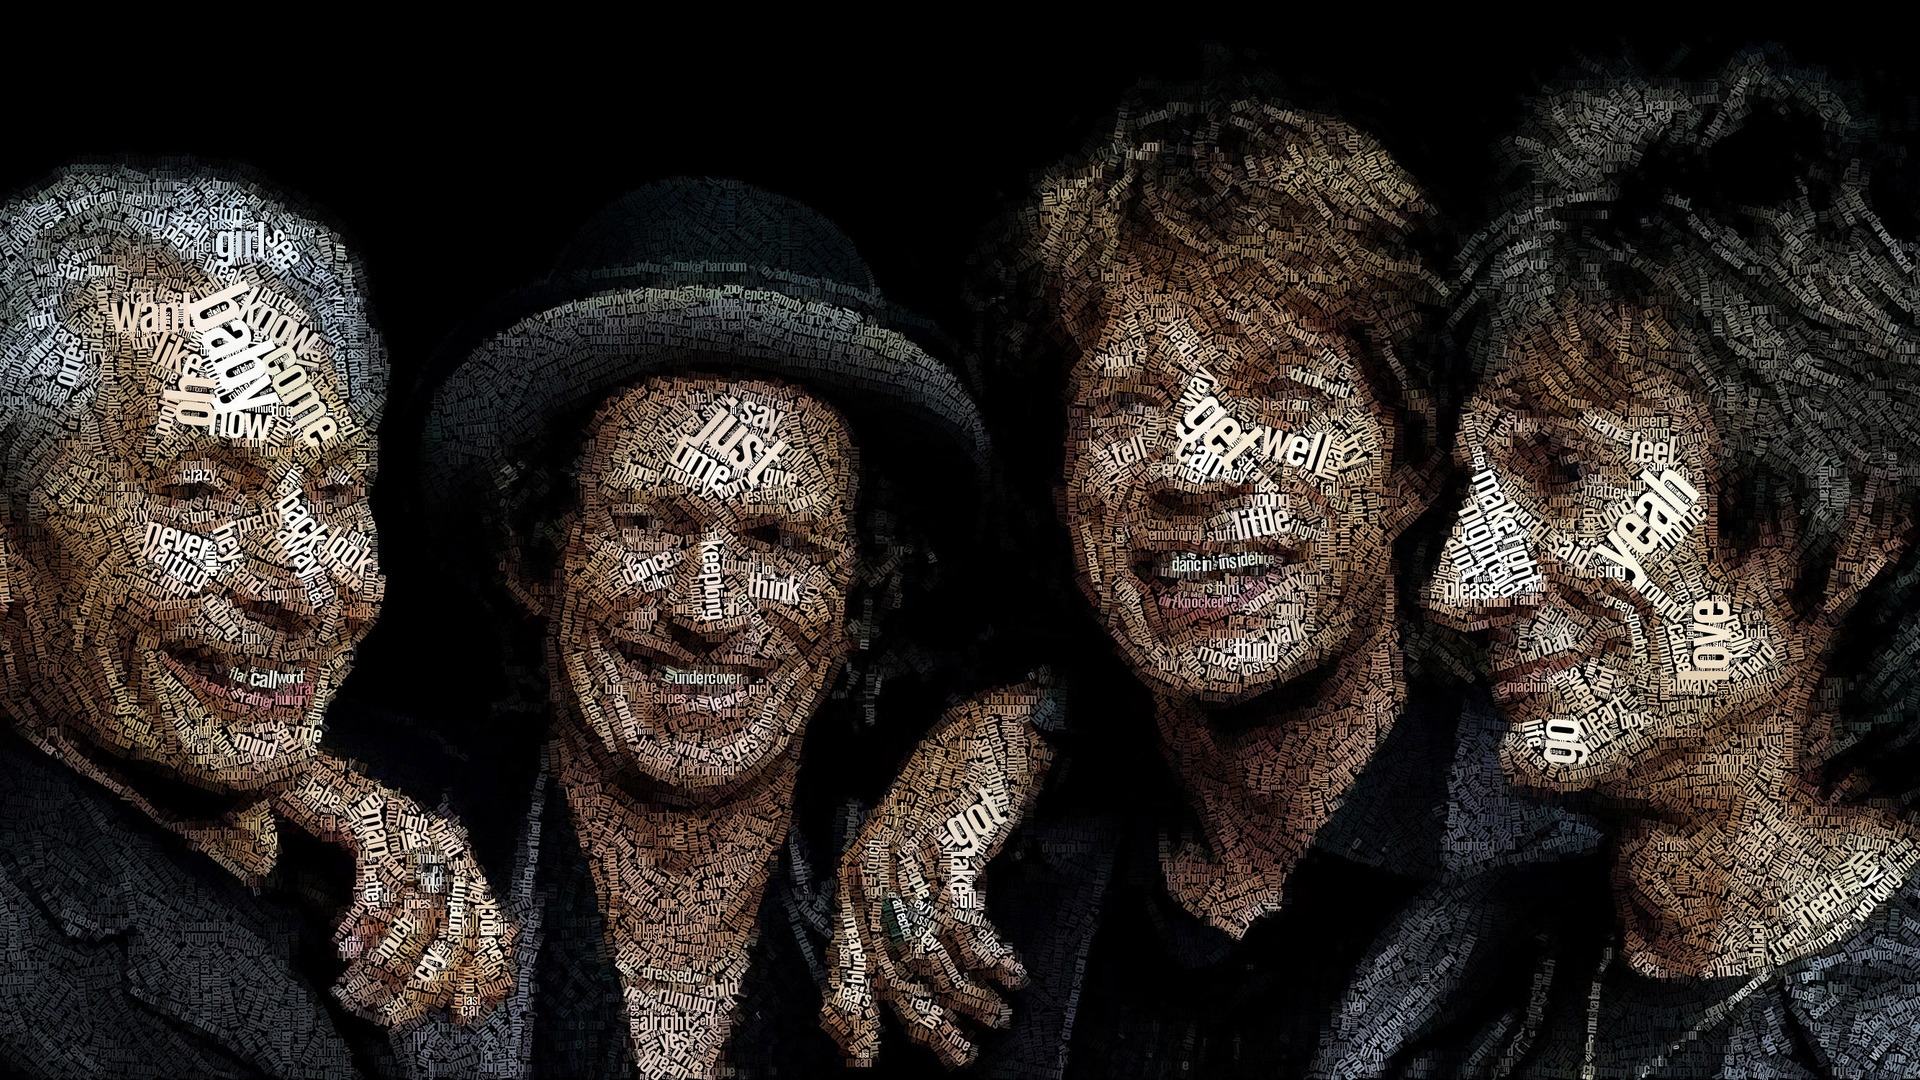 Rolling Stones Members for 1920 x 1080 HDTV 1080p resolution